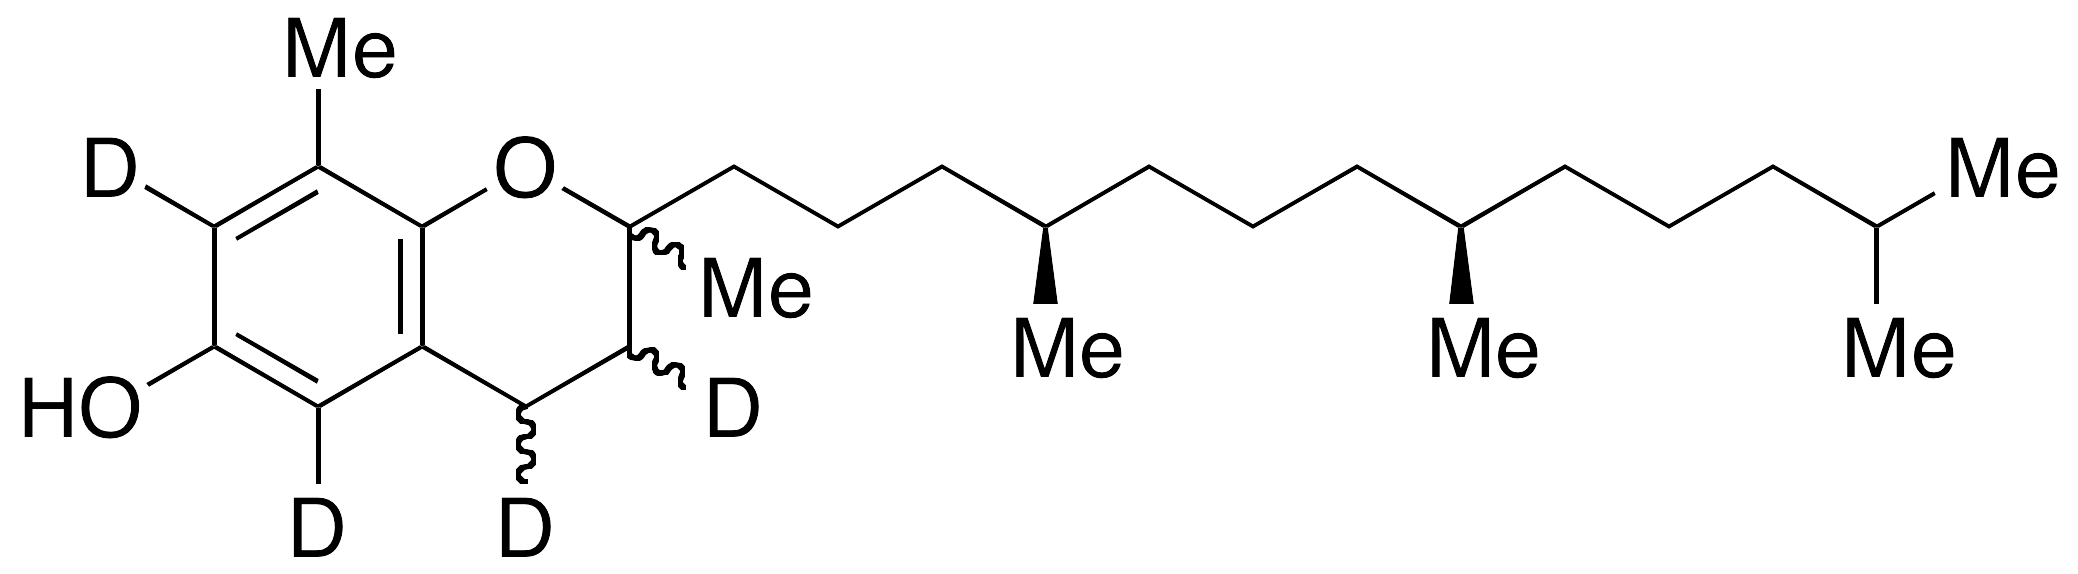 (2RS,4R,8R)-δ-Tocopherol-d4 (Mixture of Diastereomers)